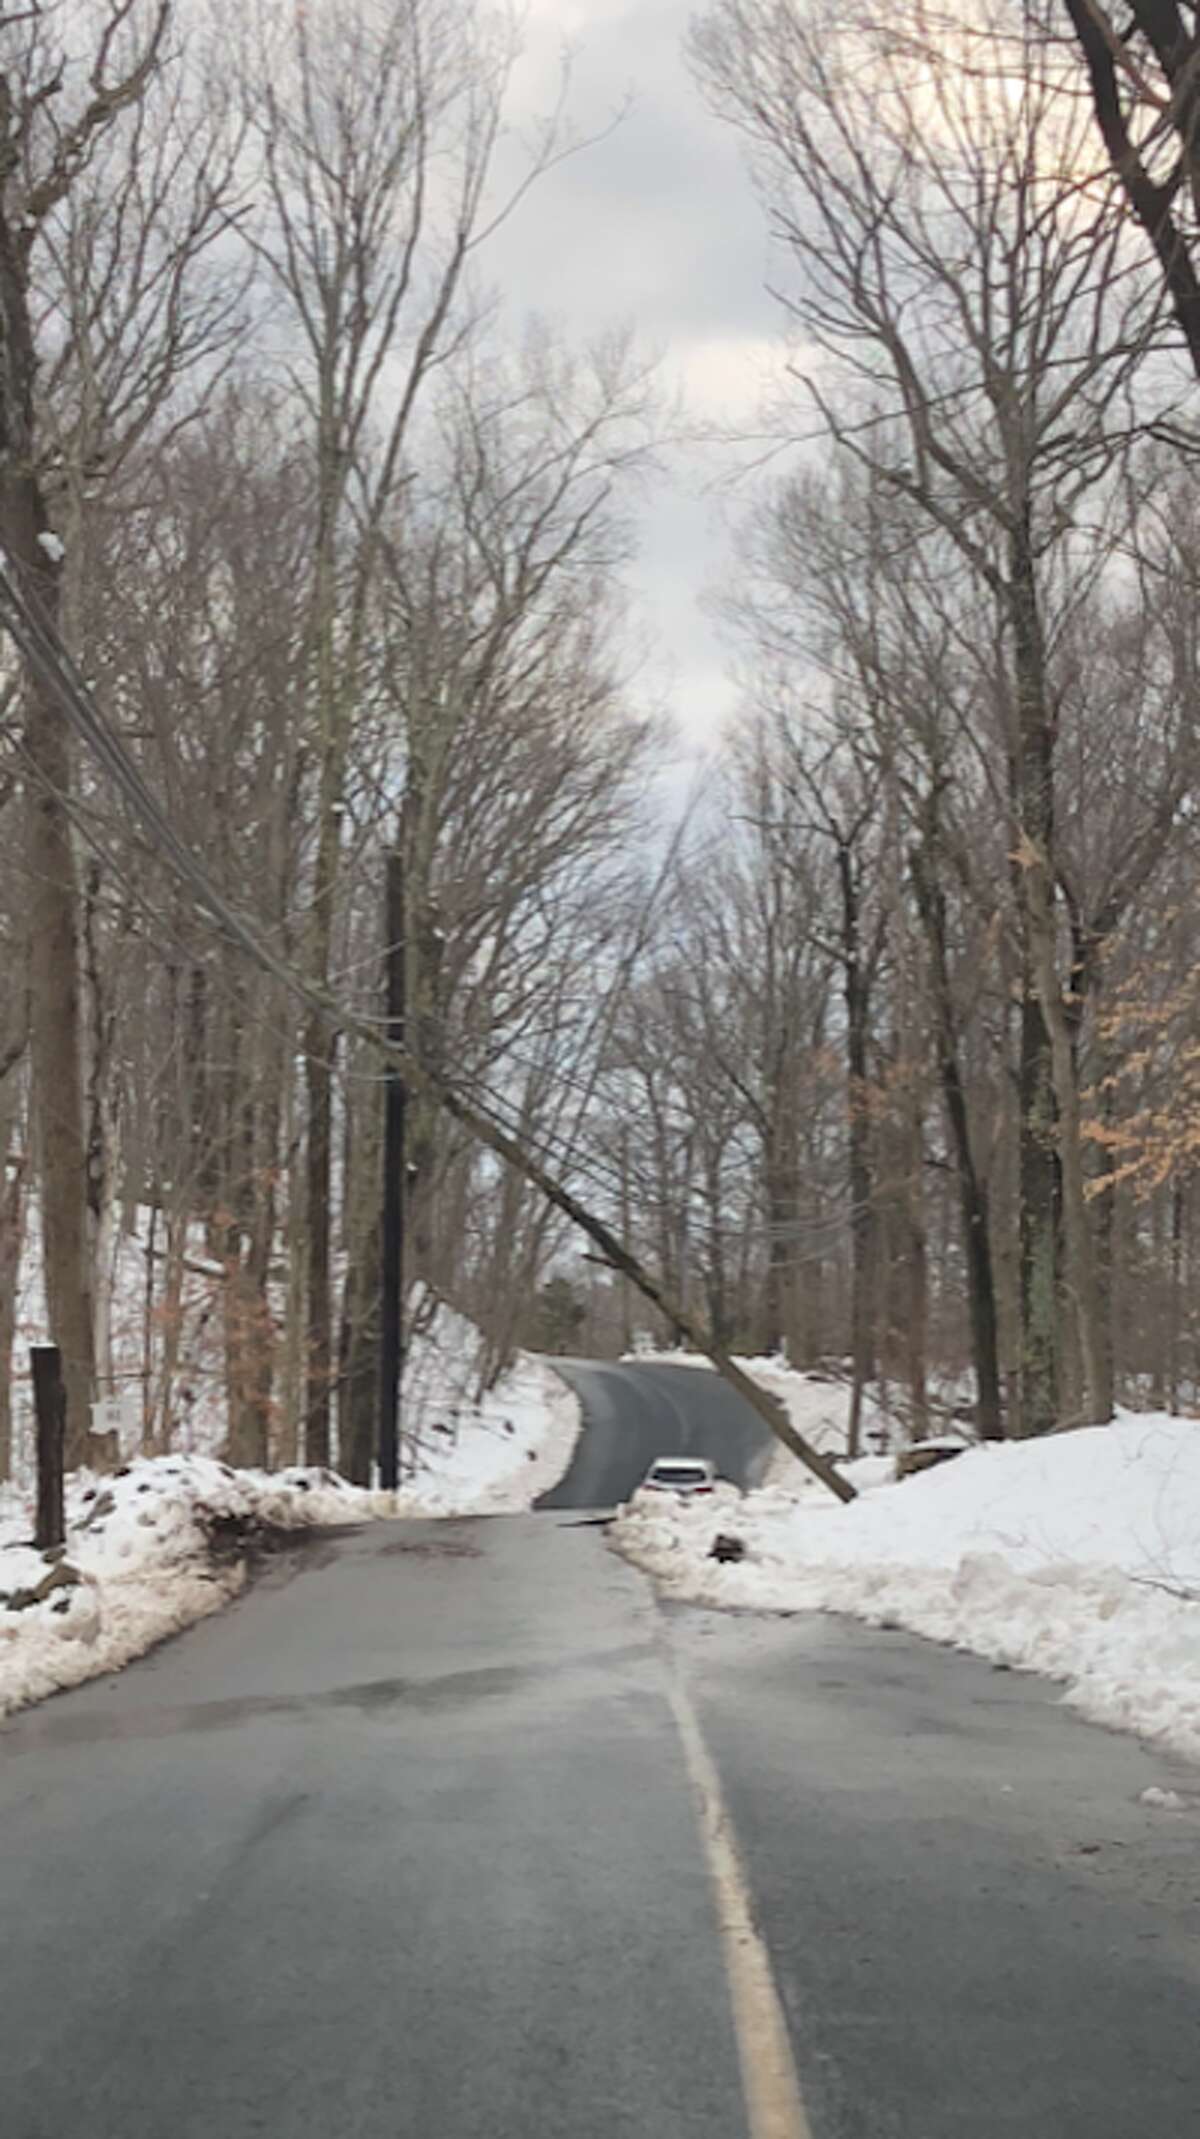 Carrie Mattison sent this picture of a tree over Old Highway.